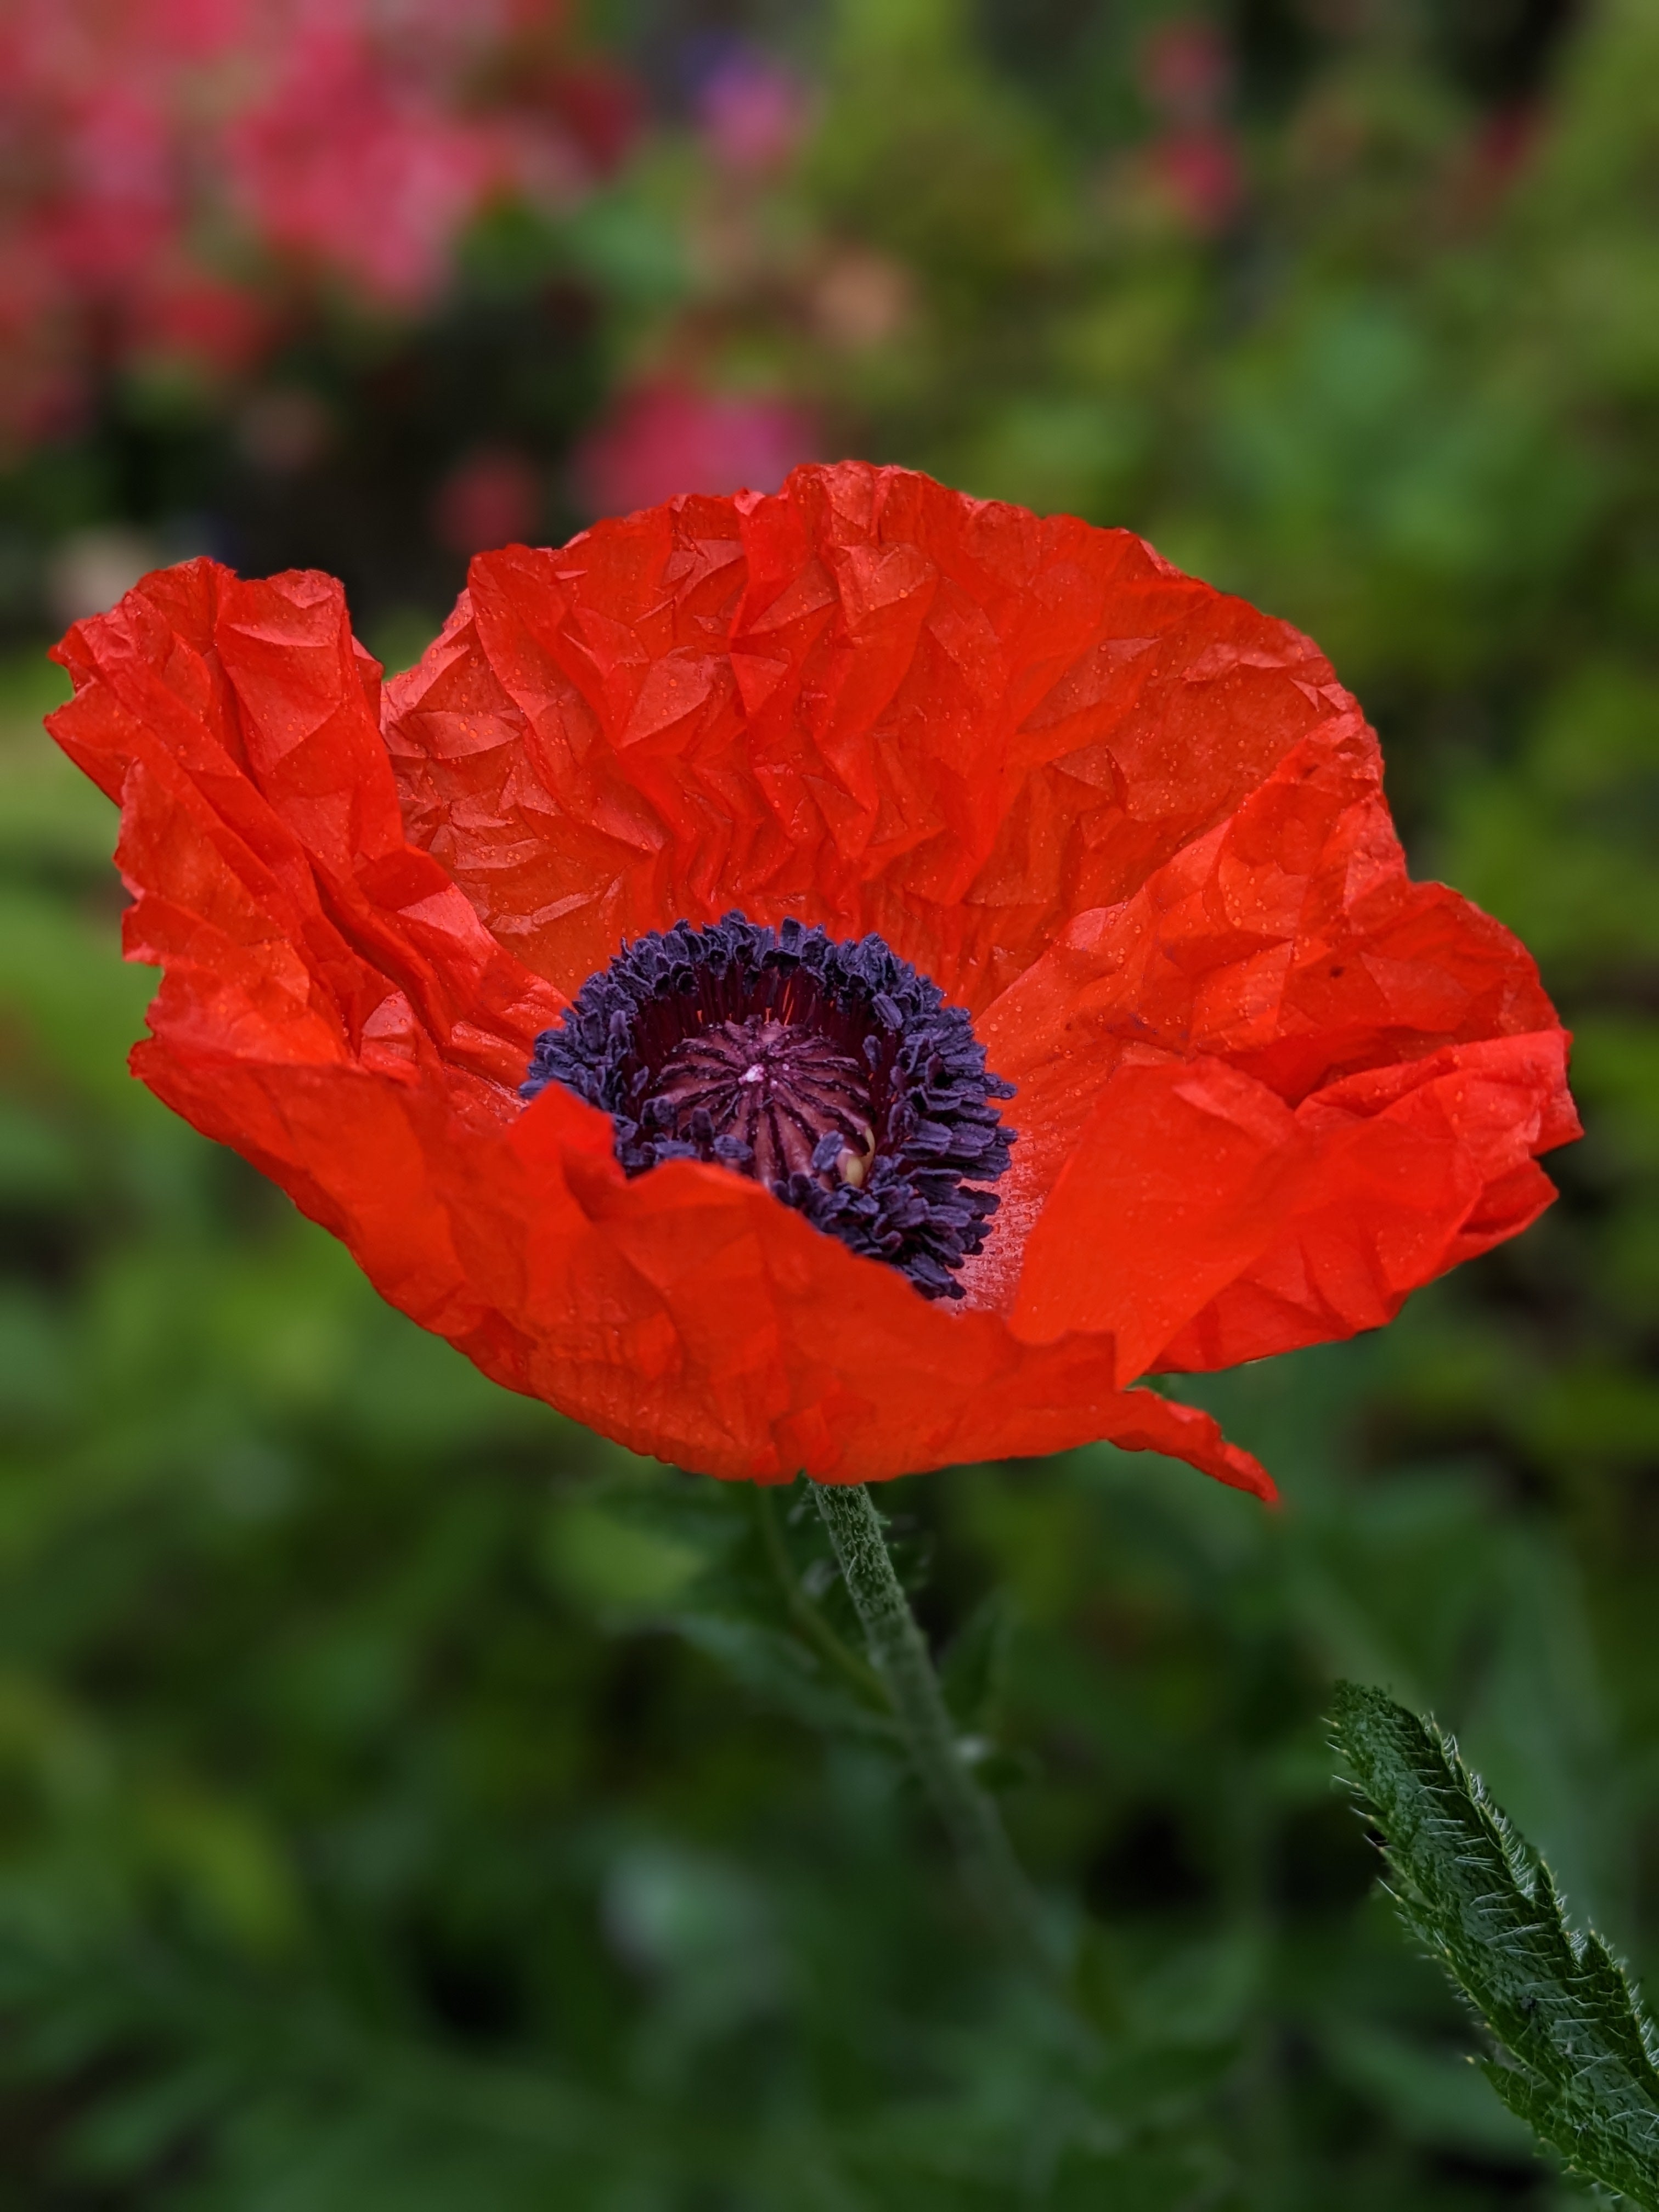 freshly opened red poppy with crinkly petals